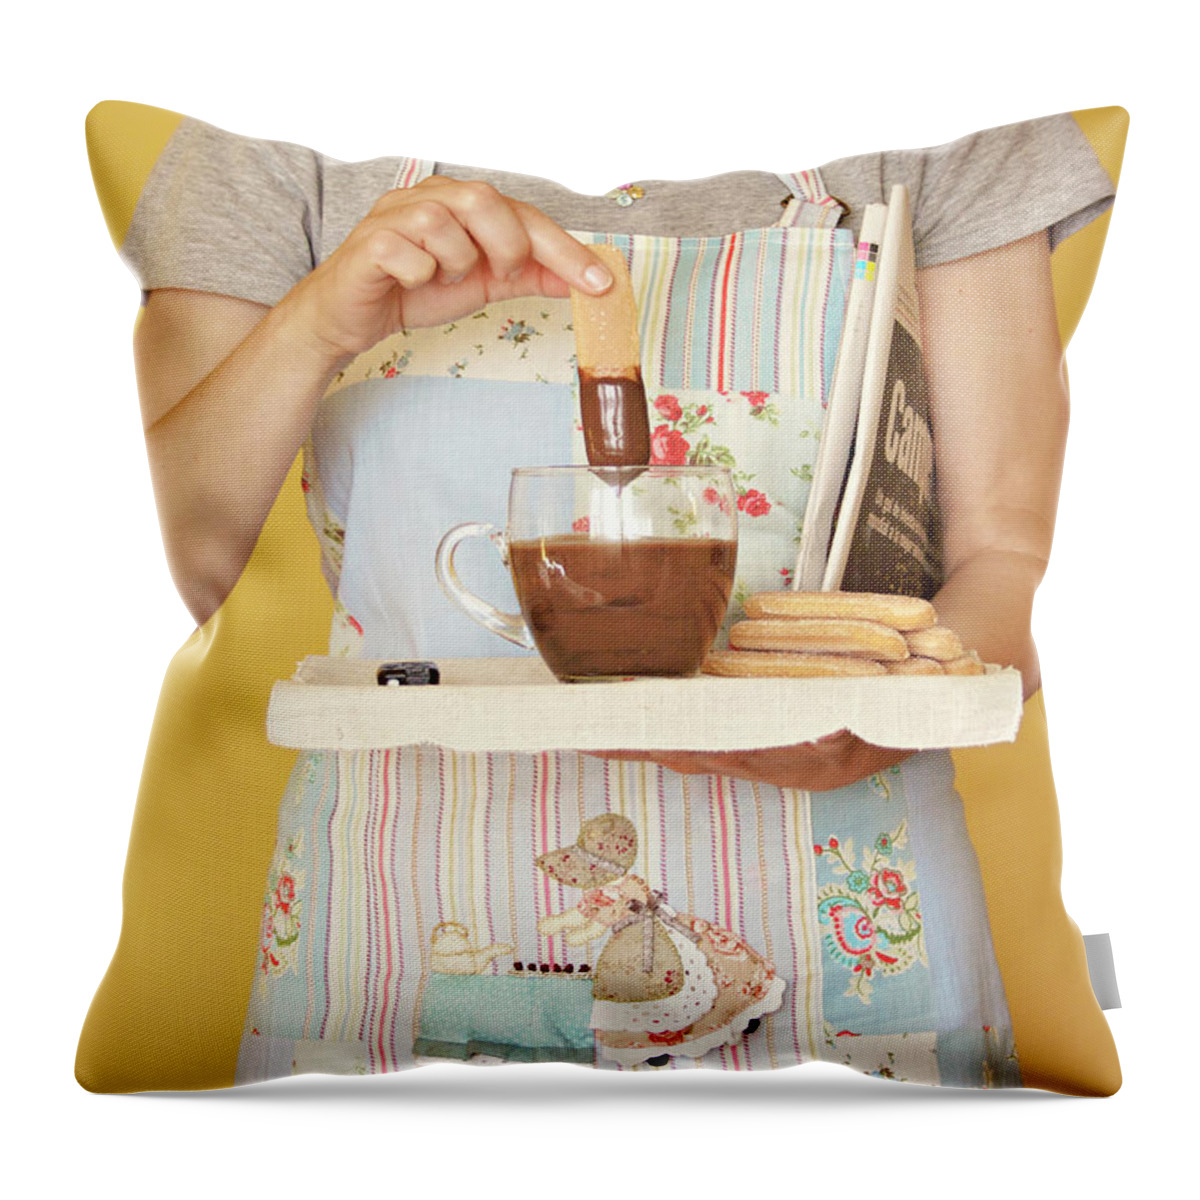 Breakfast Throw Pillow featuring the photograph Breakfast With Chocolate by Montse Cuesta